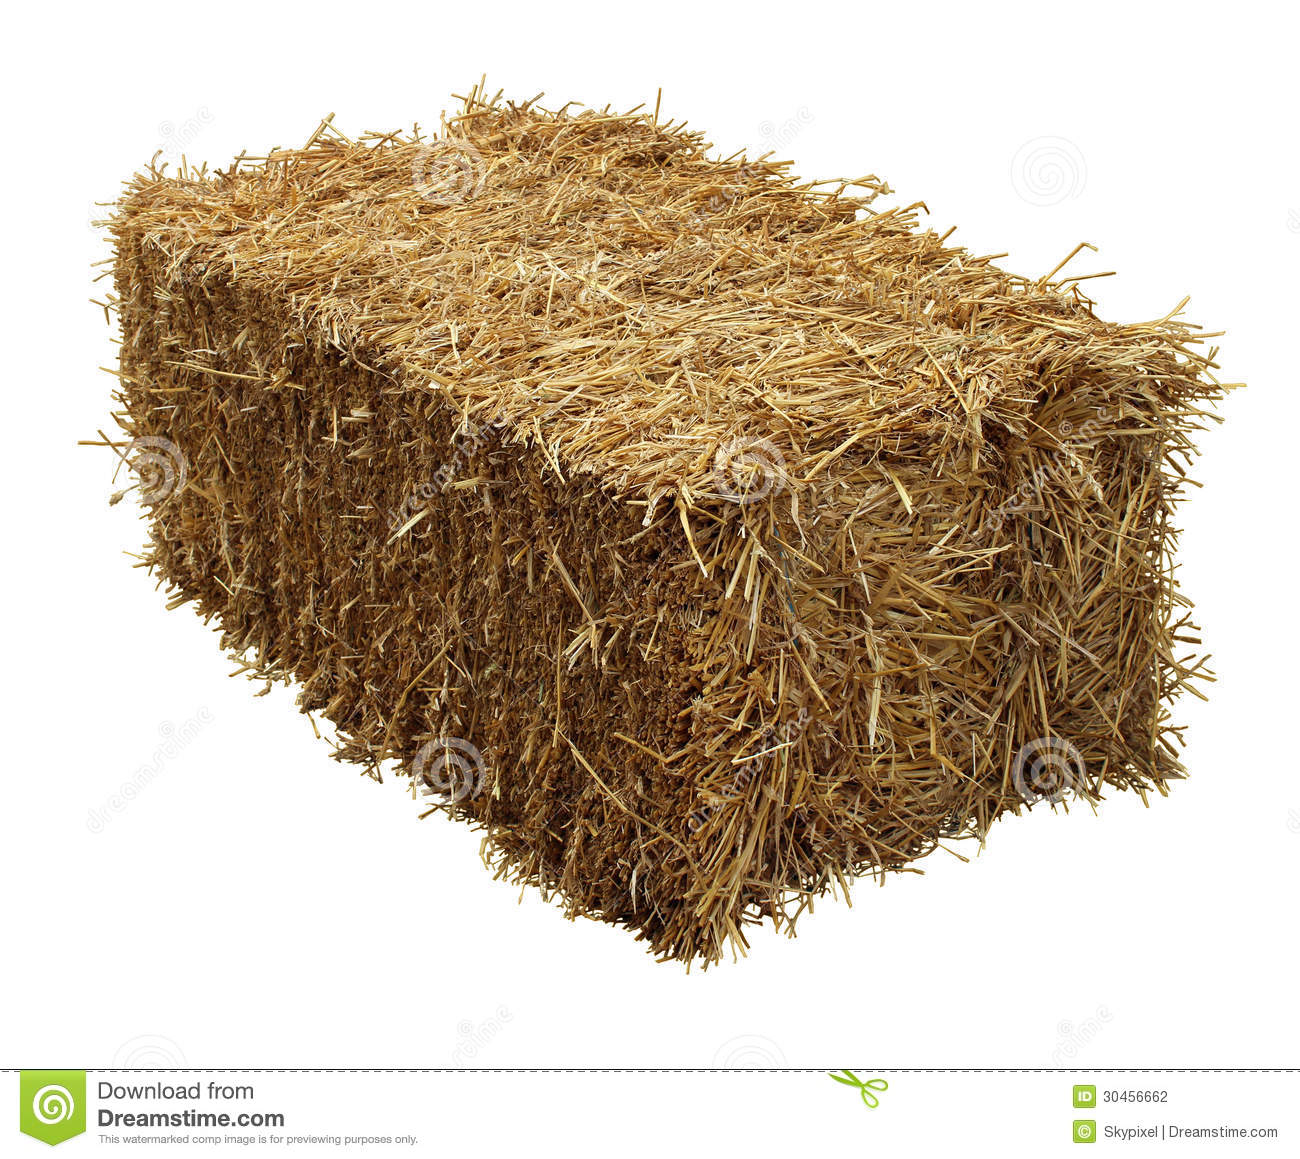 Bale Of Hay Isolated On A White Background As An Agriculture Farm And